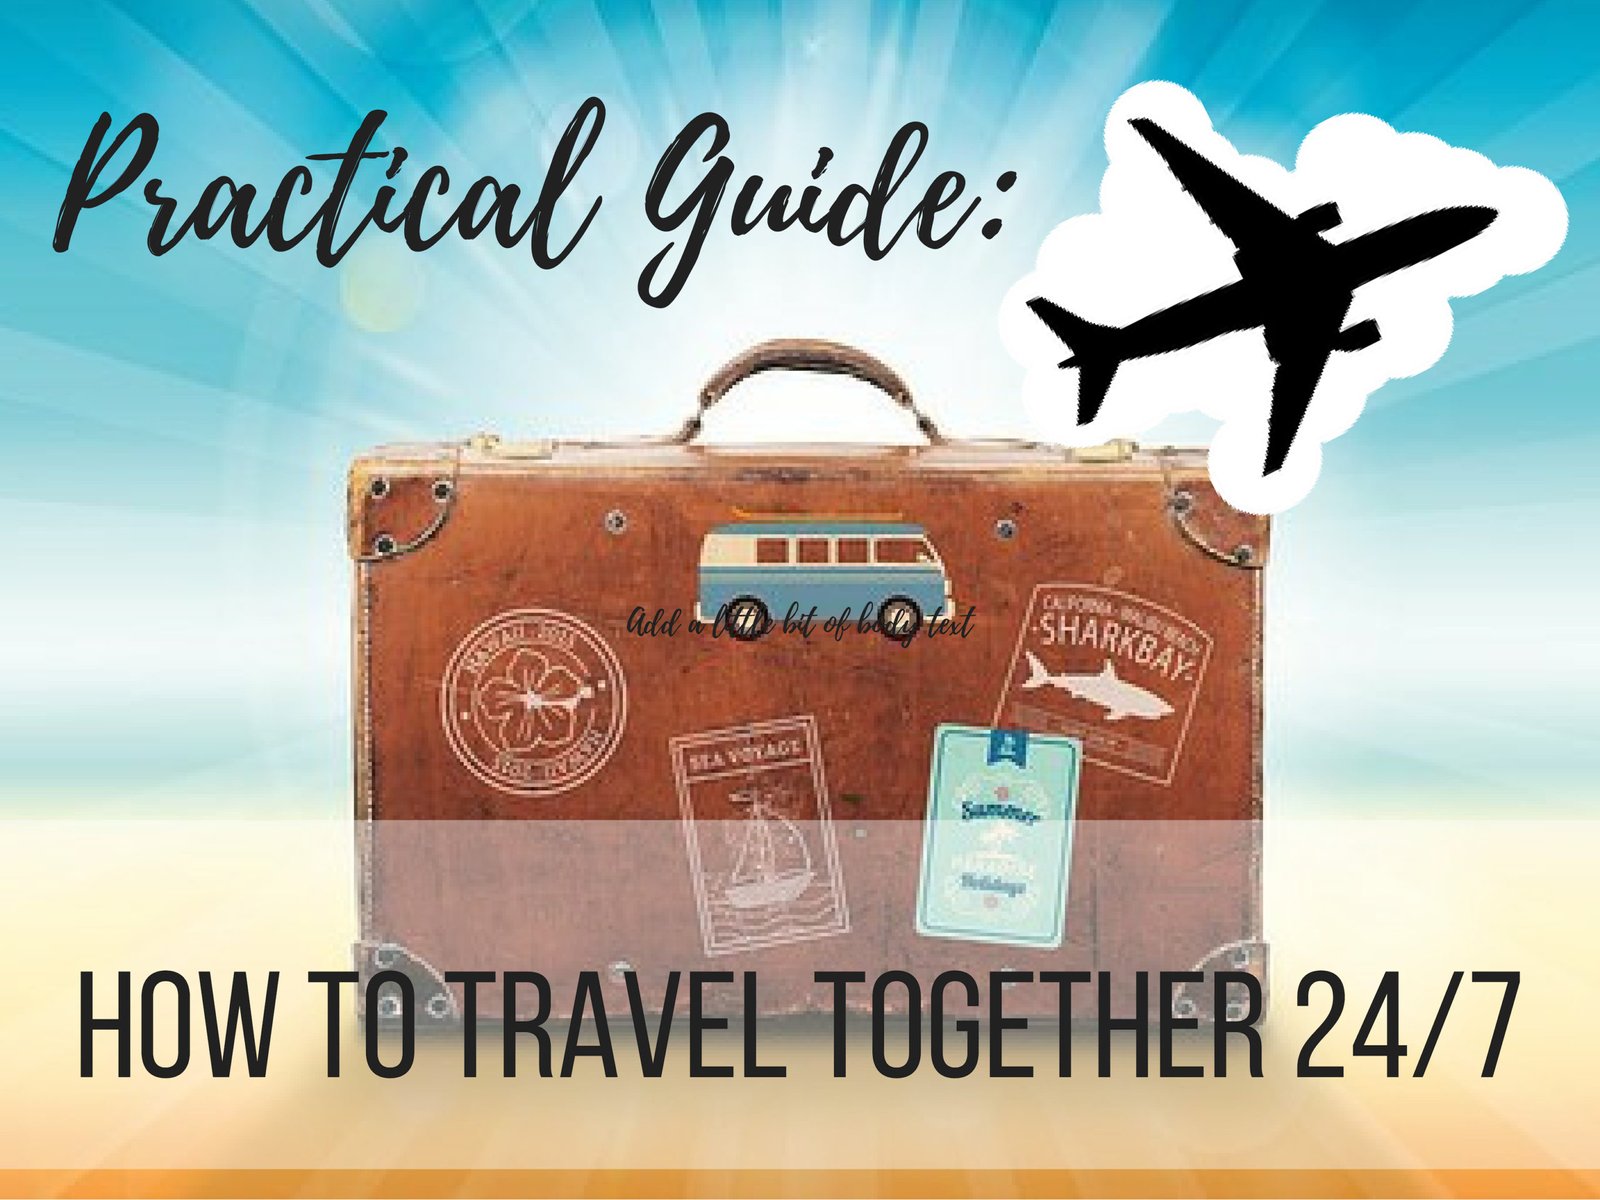 Practical Guide: how to travel together 24/7, ouritalianjourney.com